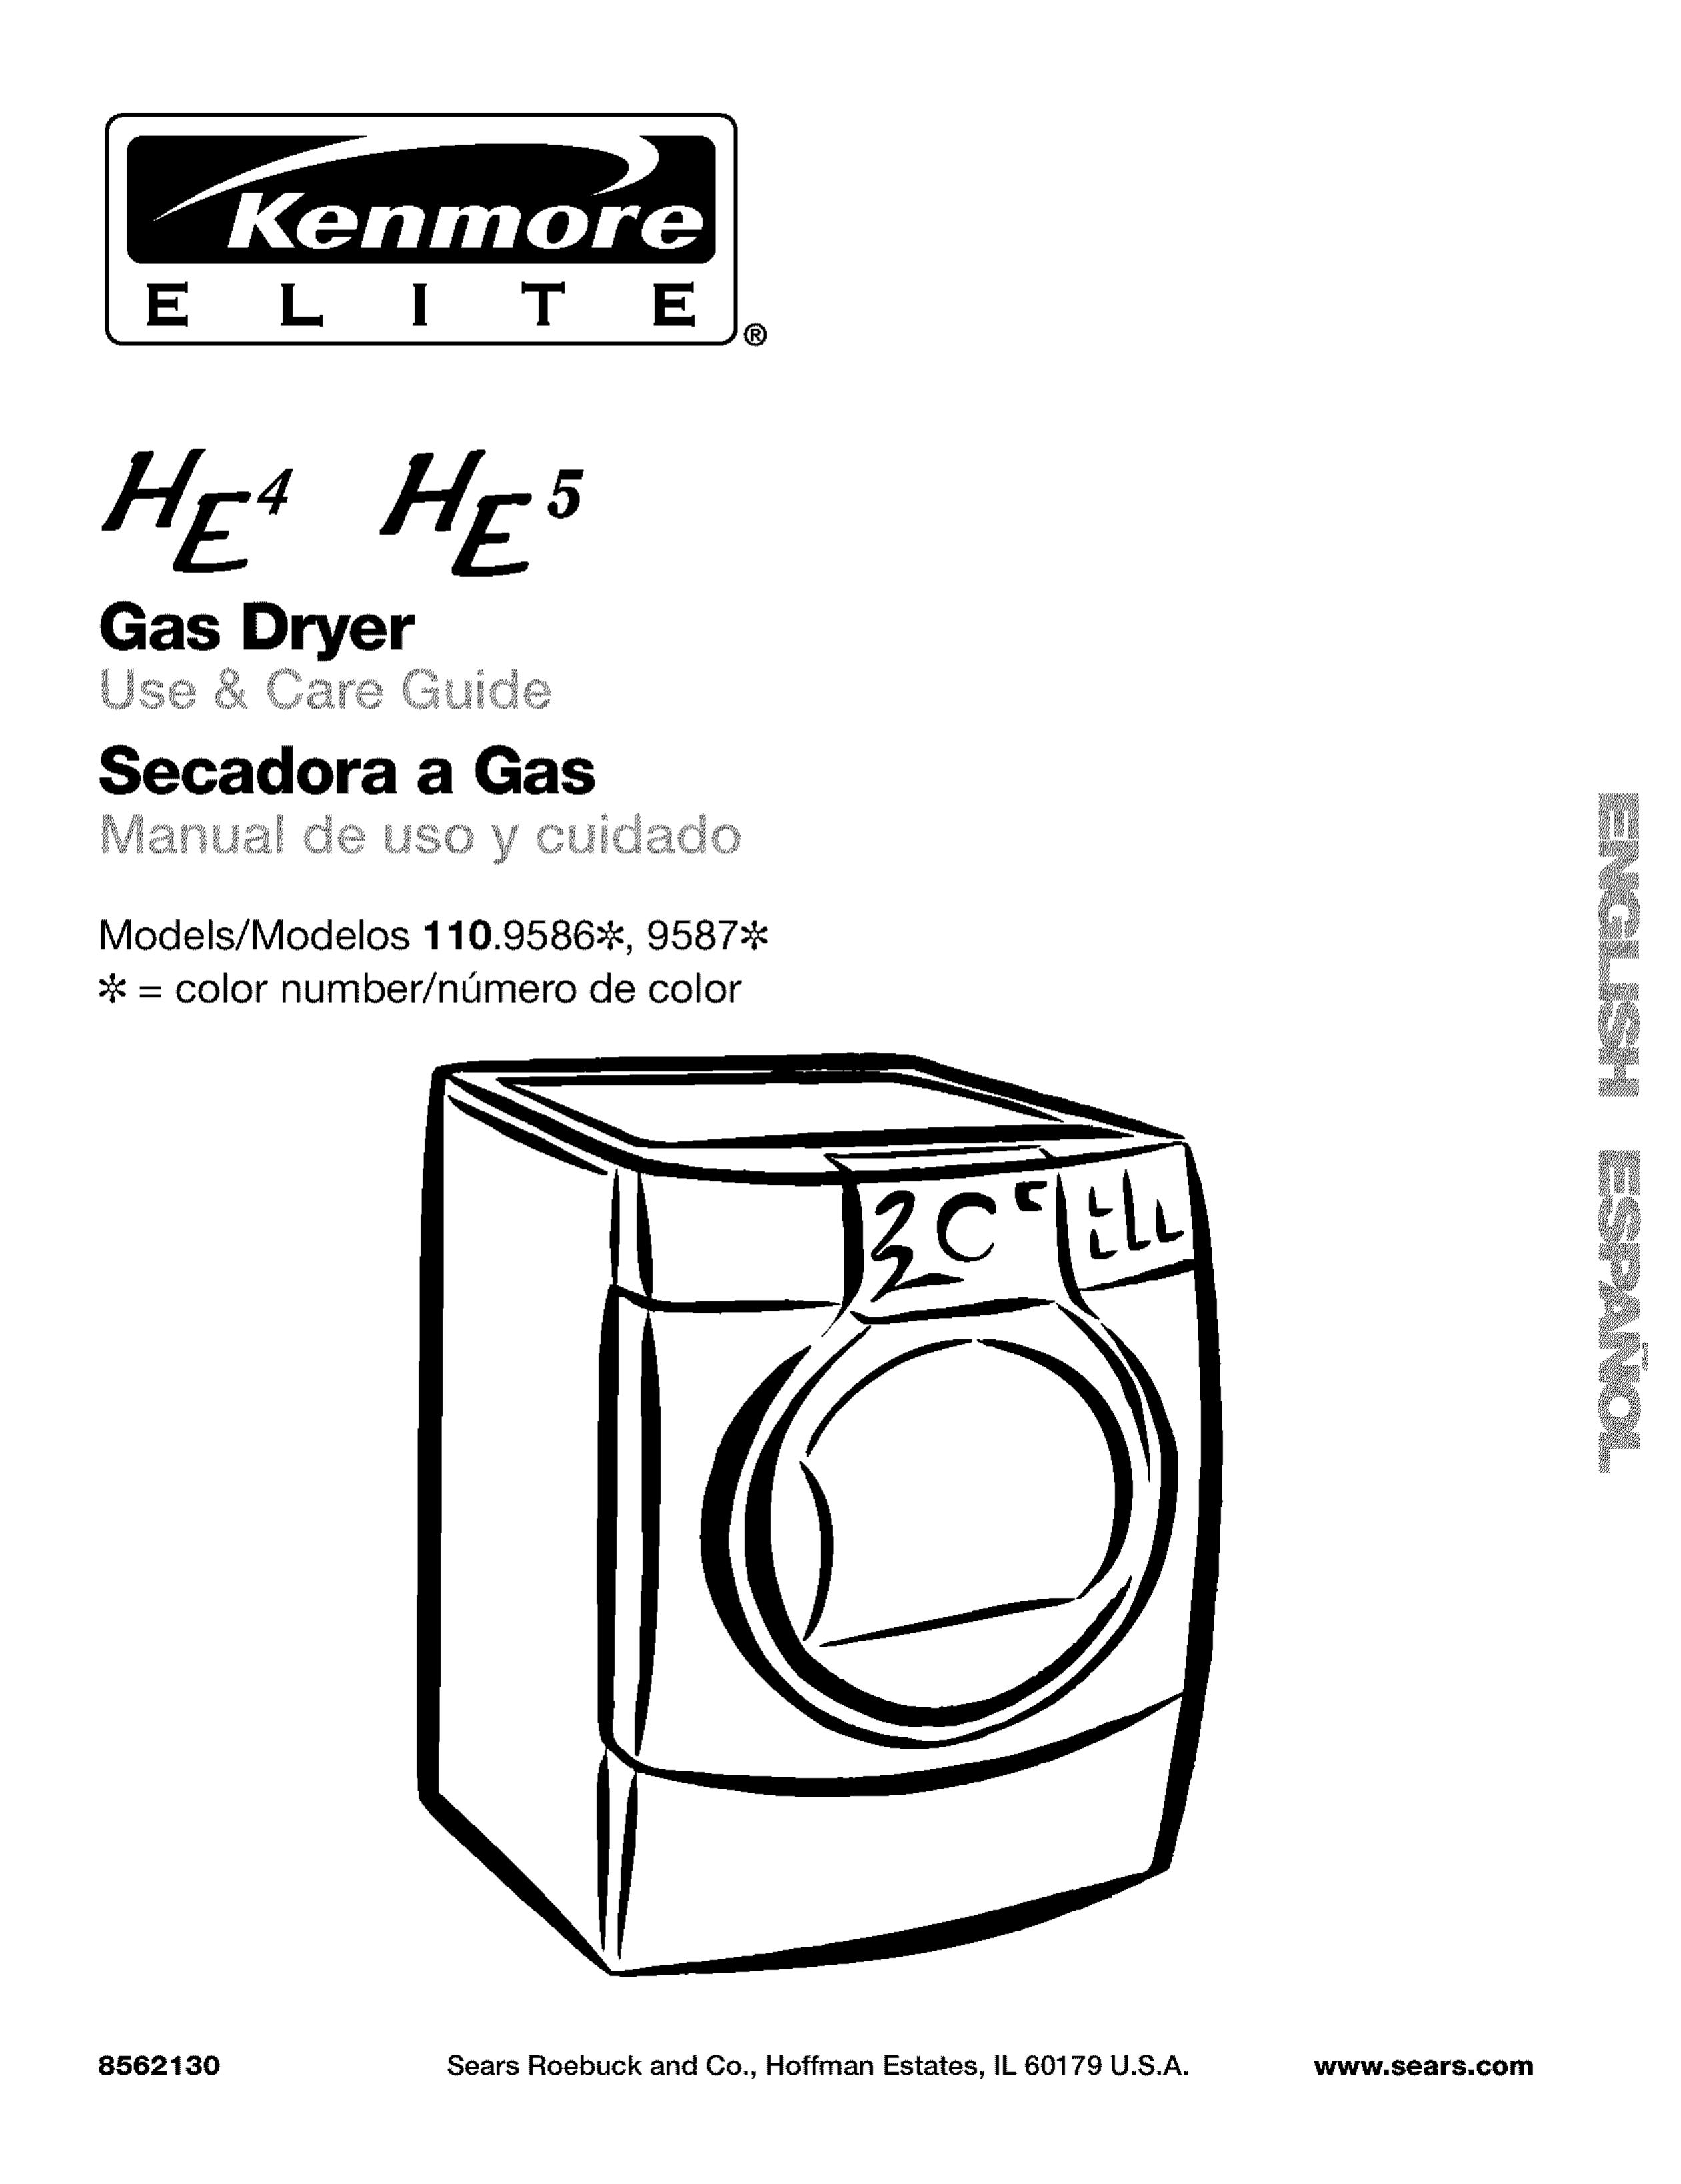 Kenmore 110.9587 Clothes Dryer User Manual